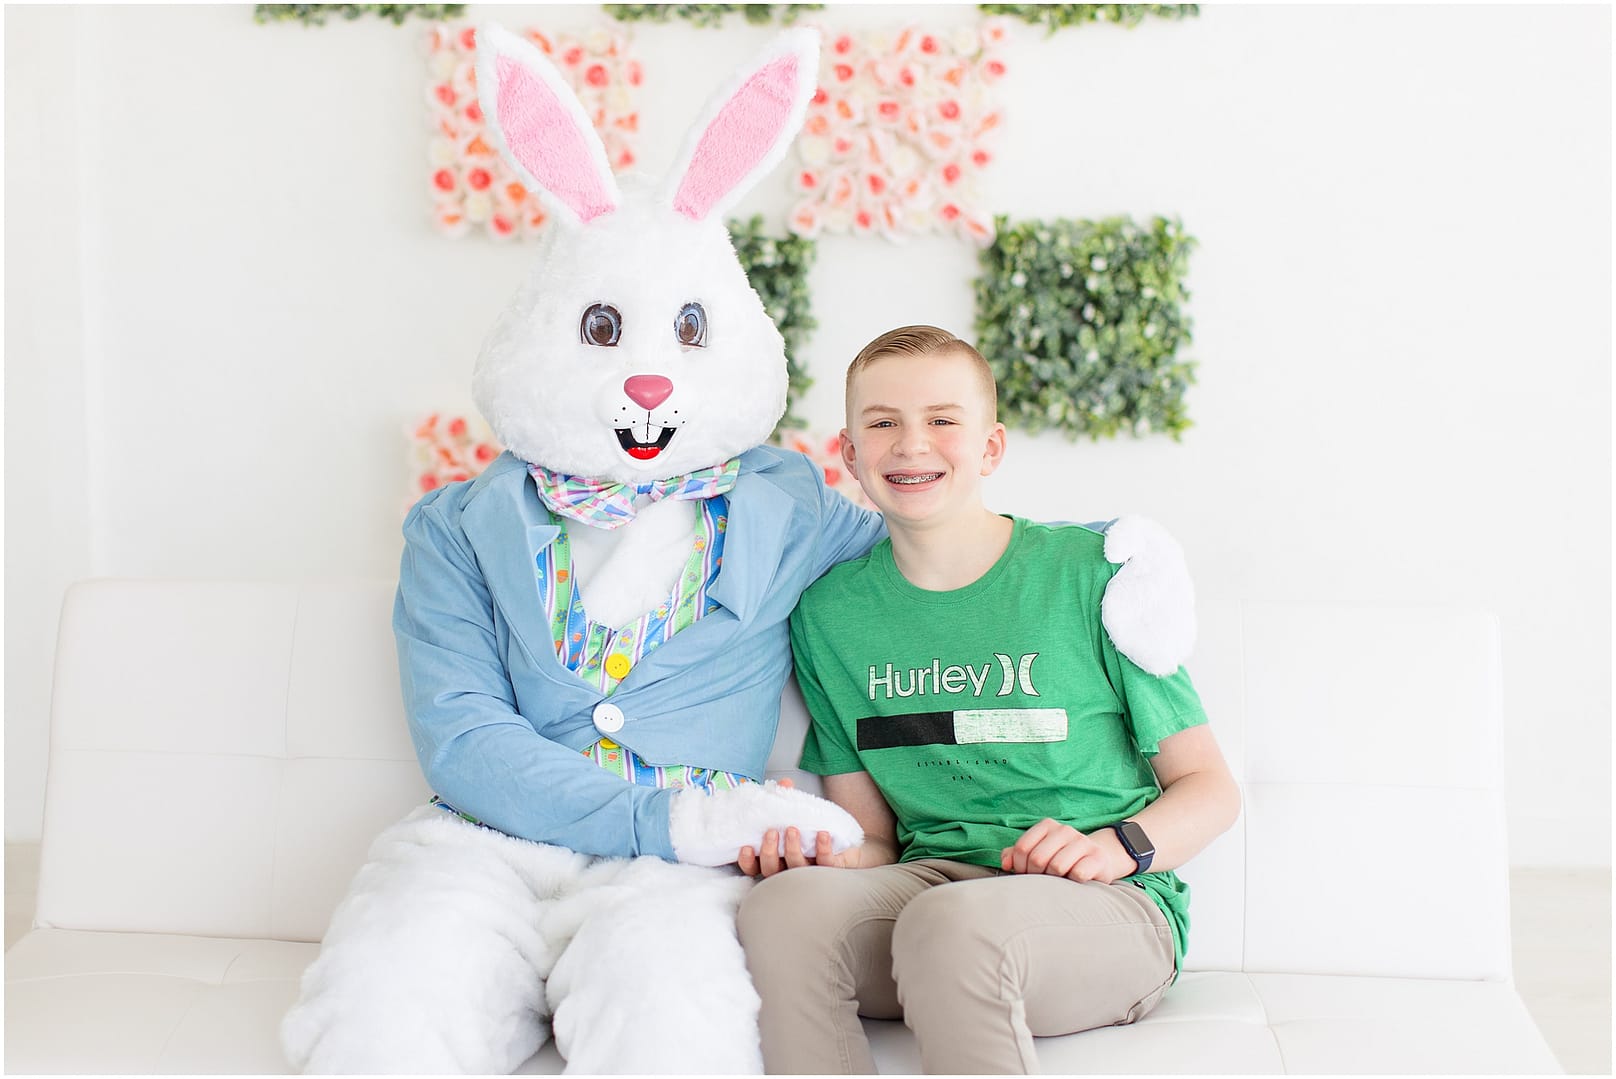 Boy in green shirt smiles next to the Easter Bunny. Photo by Tiffany Hix Photography.